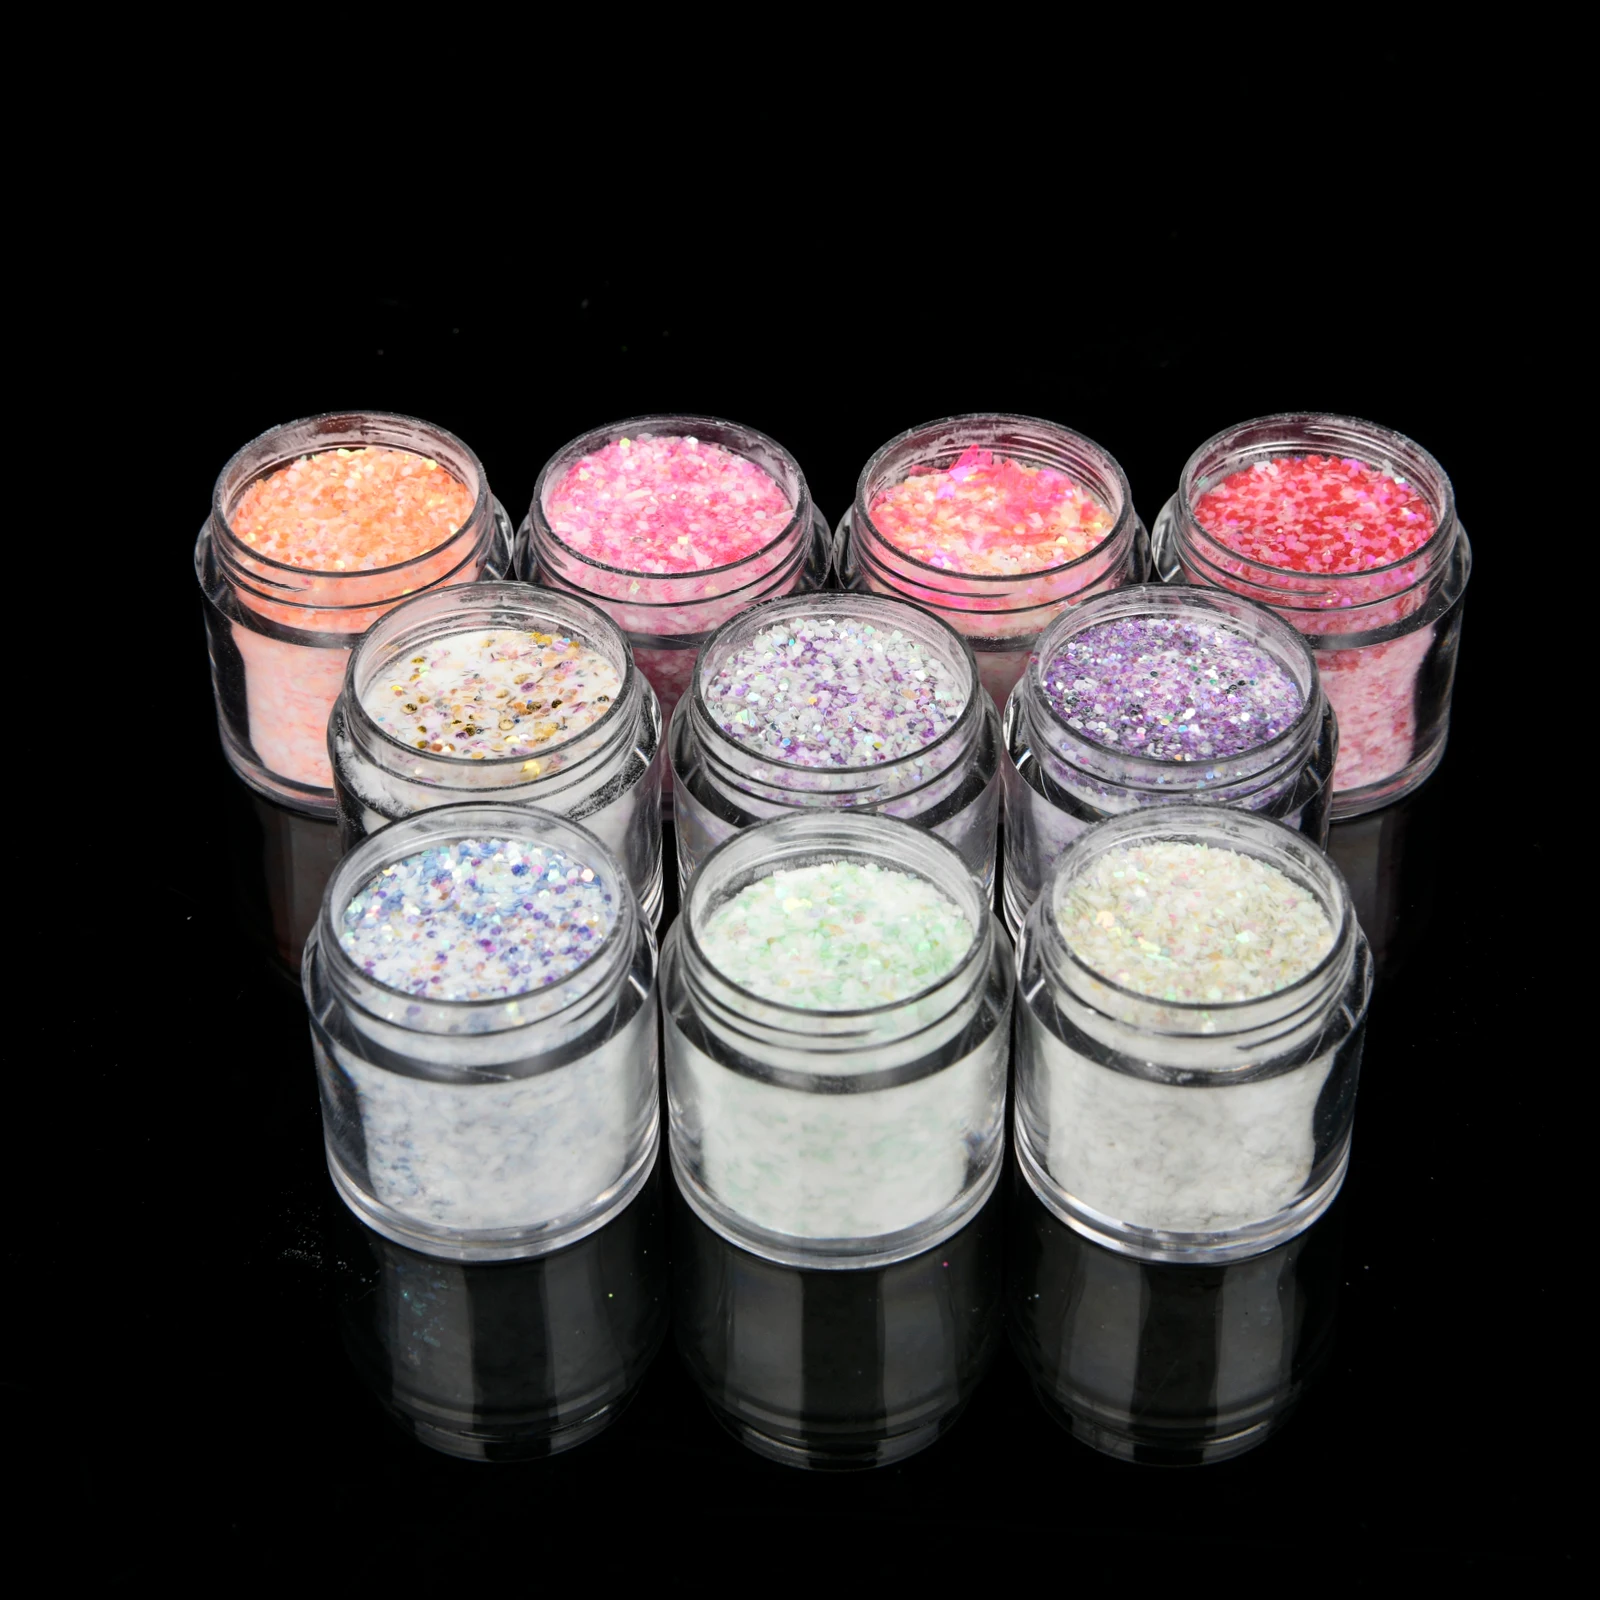 Nail Glitter 1KG Pack Holographic Bulk S Powder Polyester For Crafts  Rainbow Suppliers Polish Loose 1000G 220909 From Jia0007, $35.01